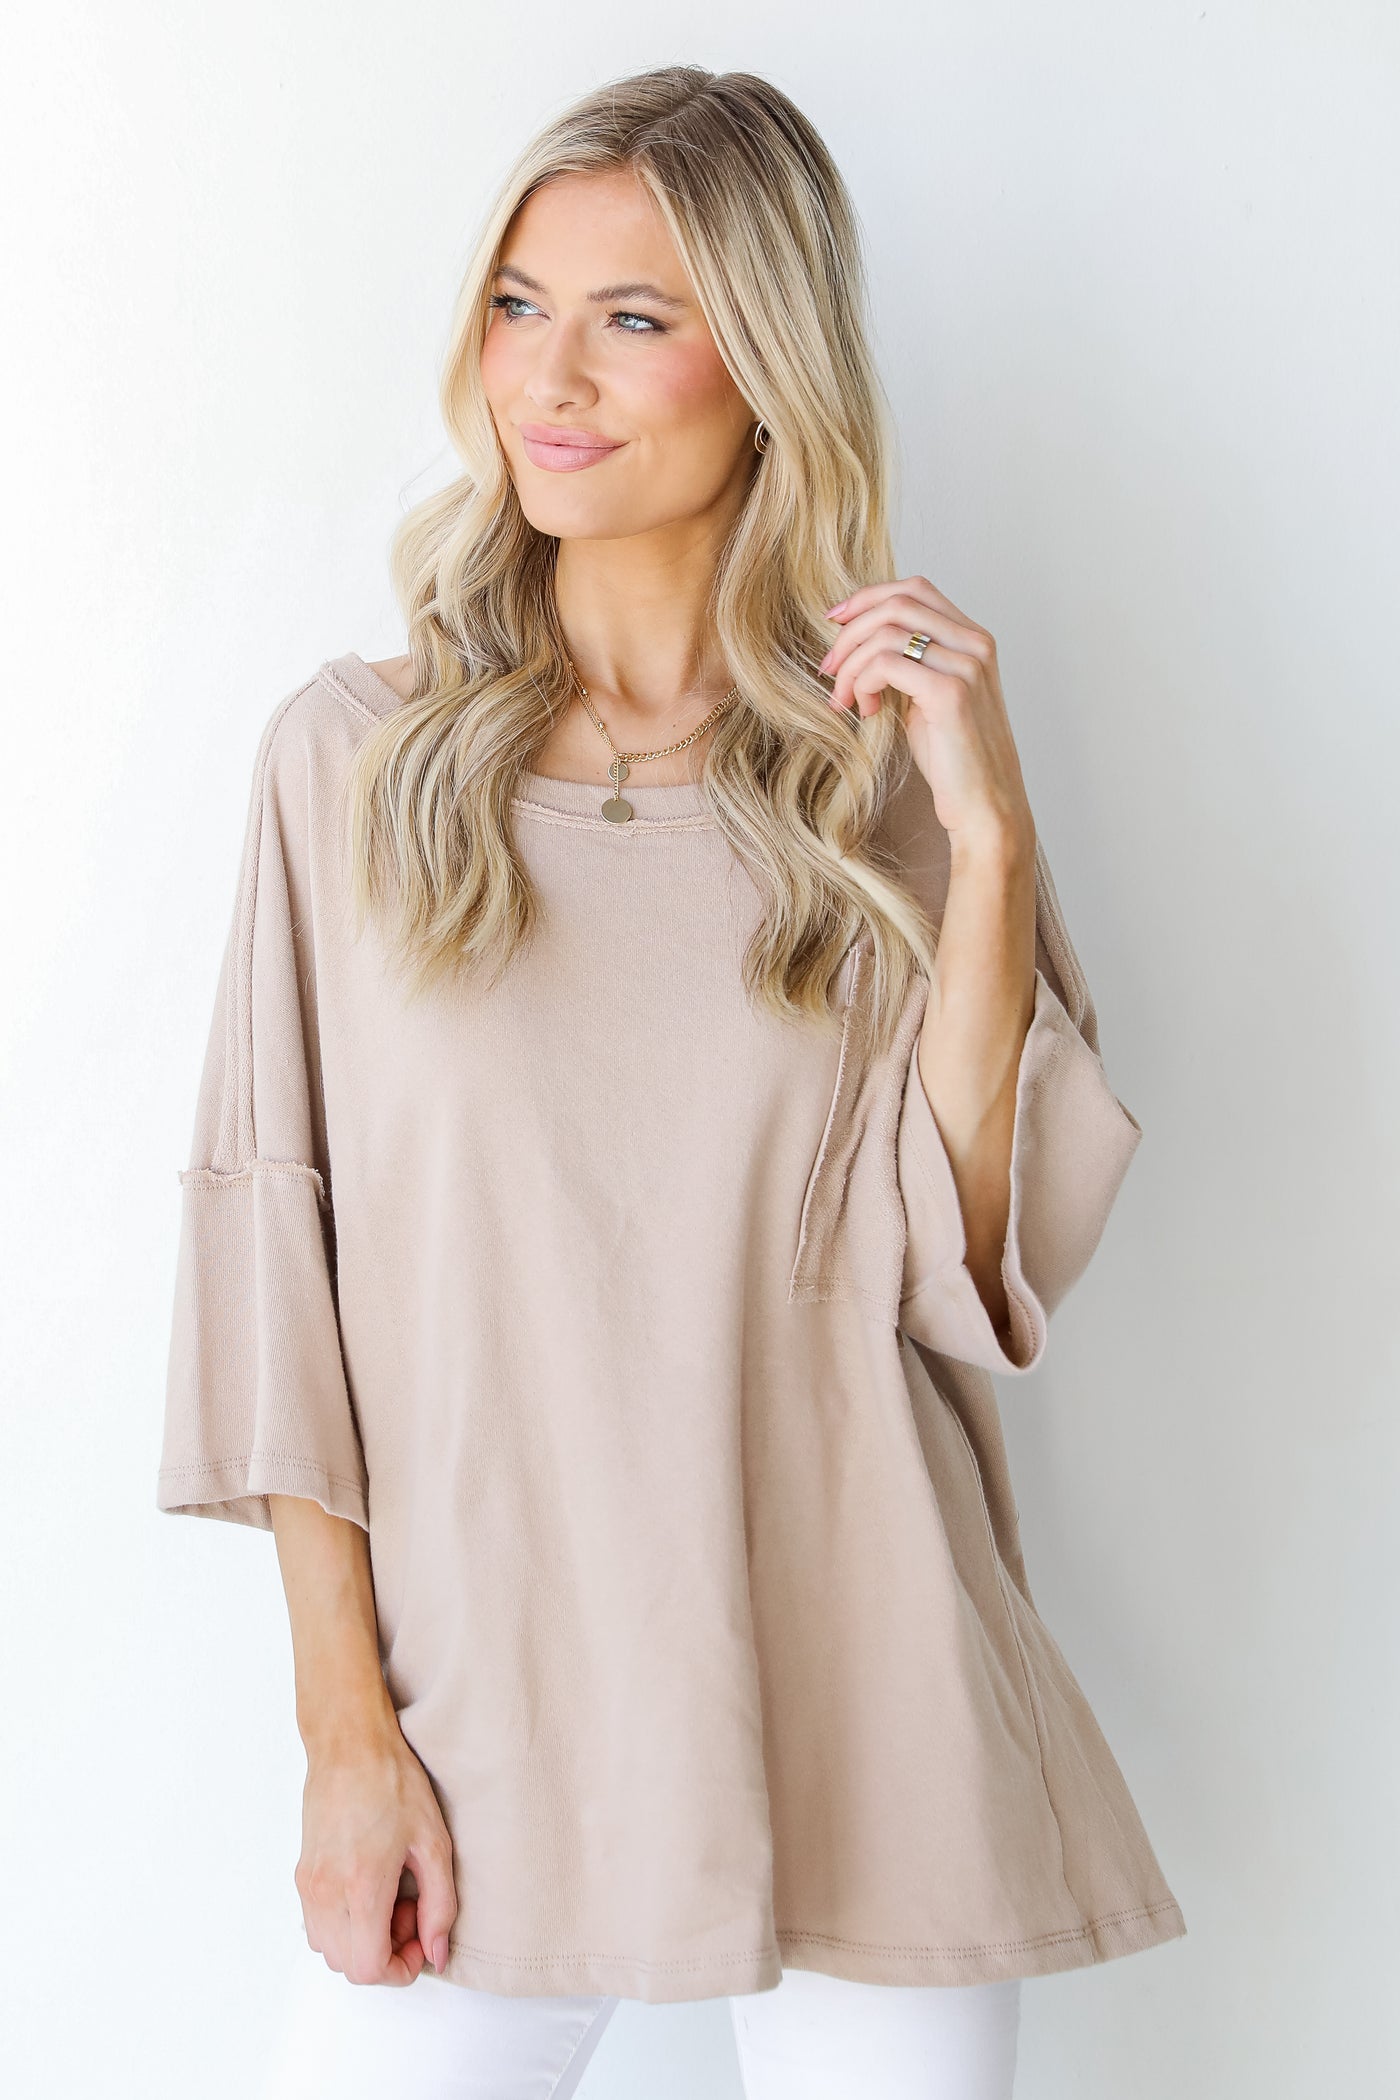 Knit Tee in taupe front view